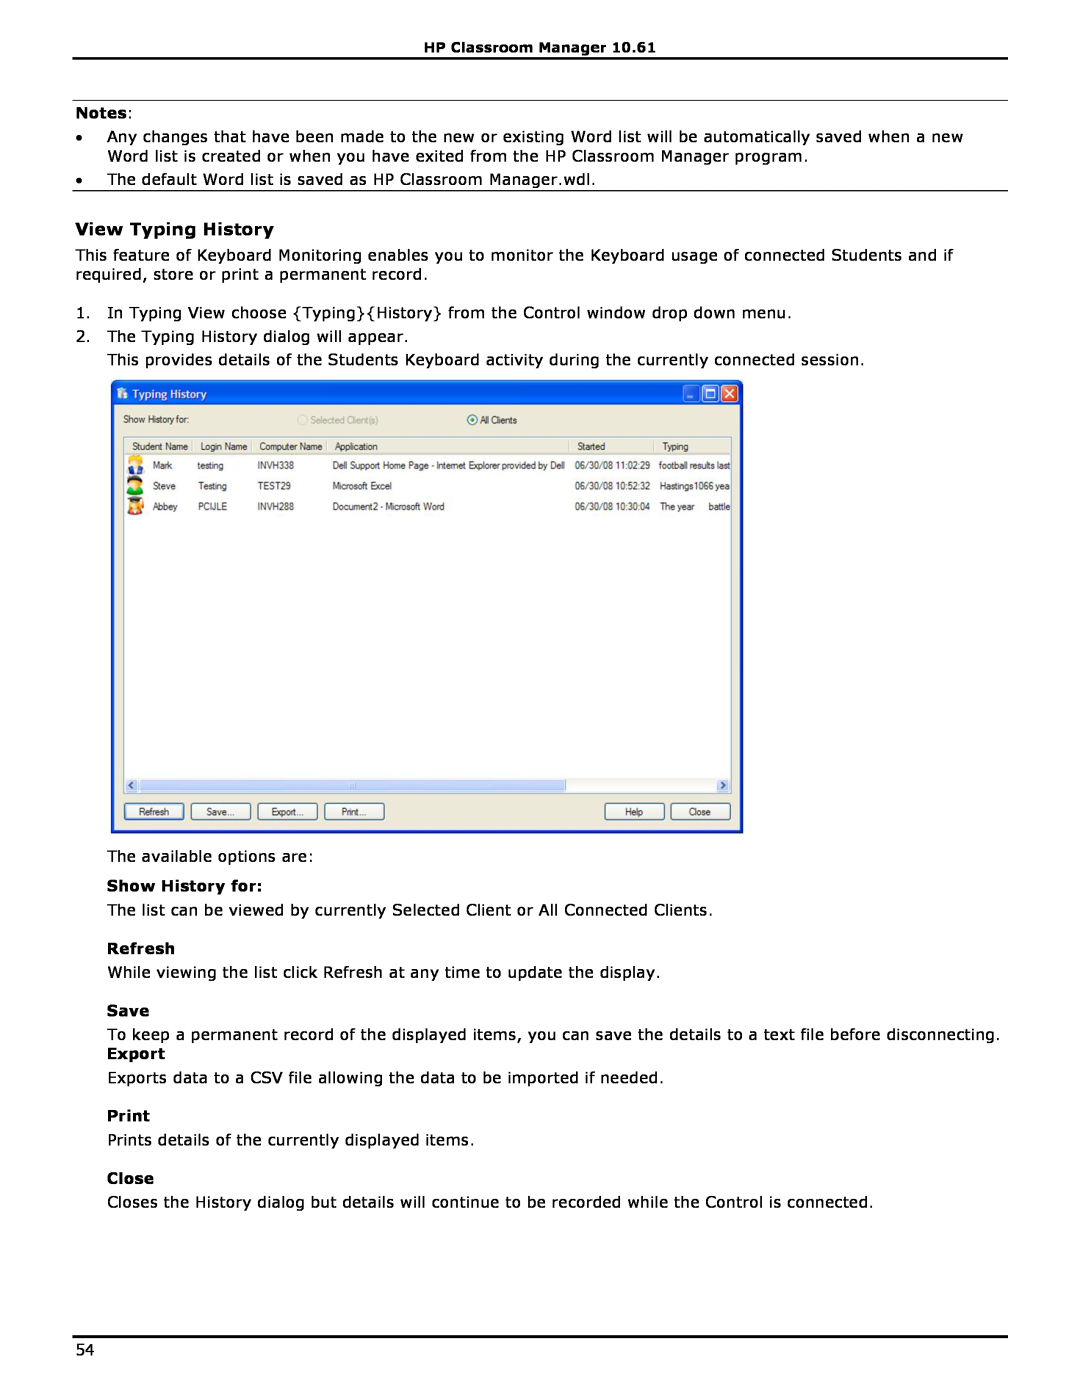 HP Classroom Manager manual View Typing History, Show History for, Refresh, Save, Export, Print, Close 